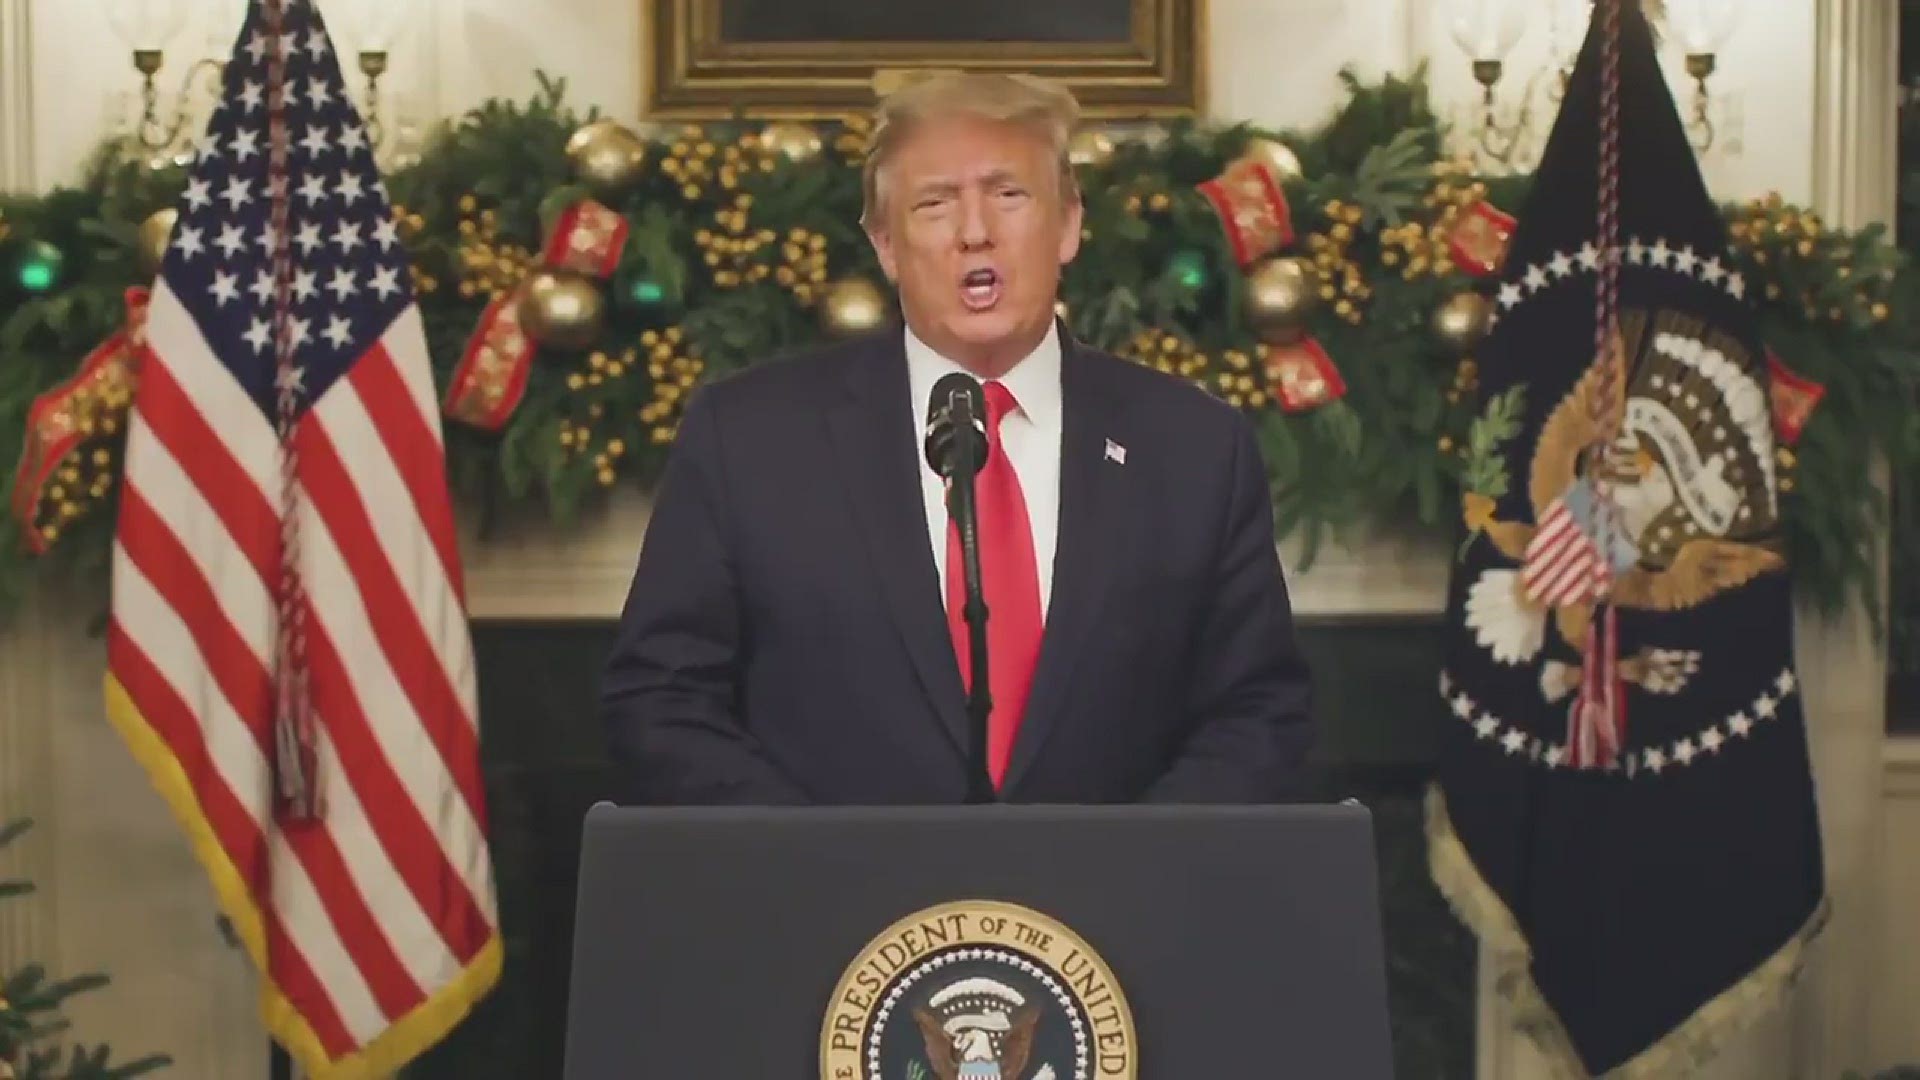 President Donald Trump posted a video on New Year's Eve celebrating the COVID-19 vaccine, the U.S. Economy and the accomplishments of the country in 2020.